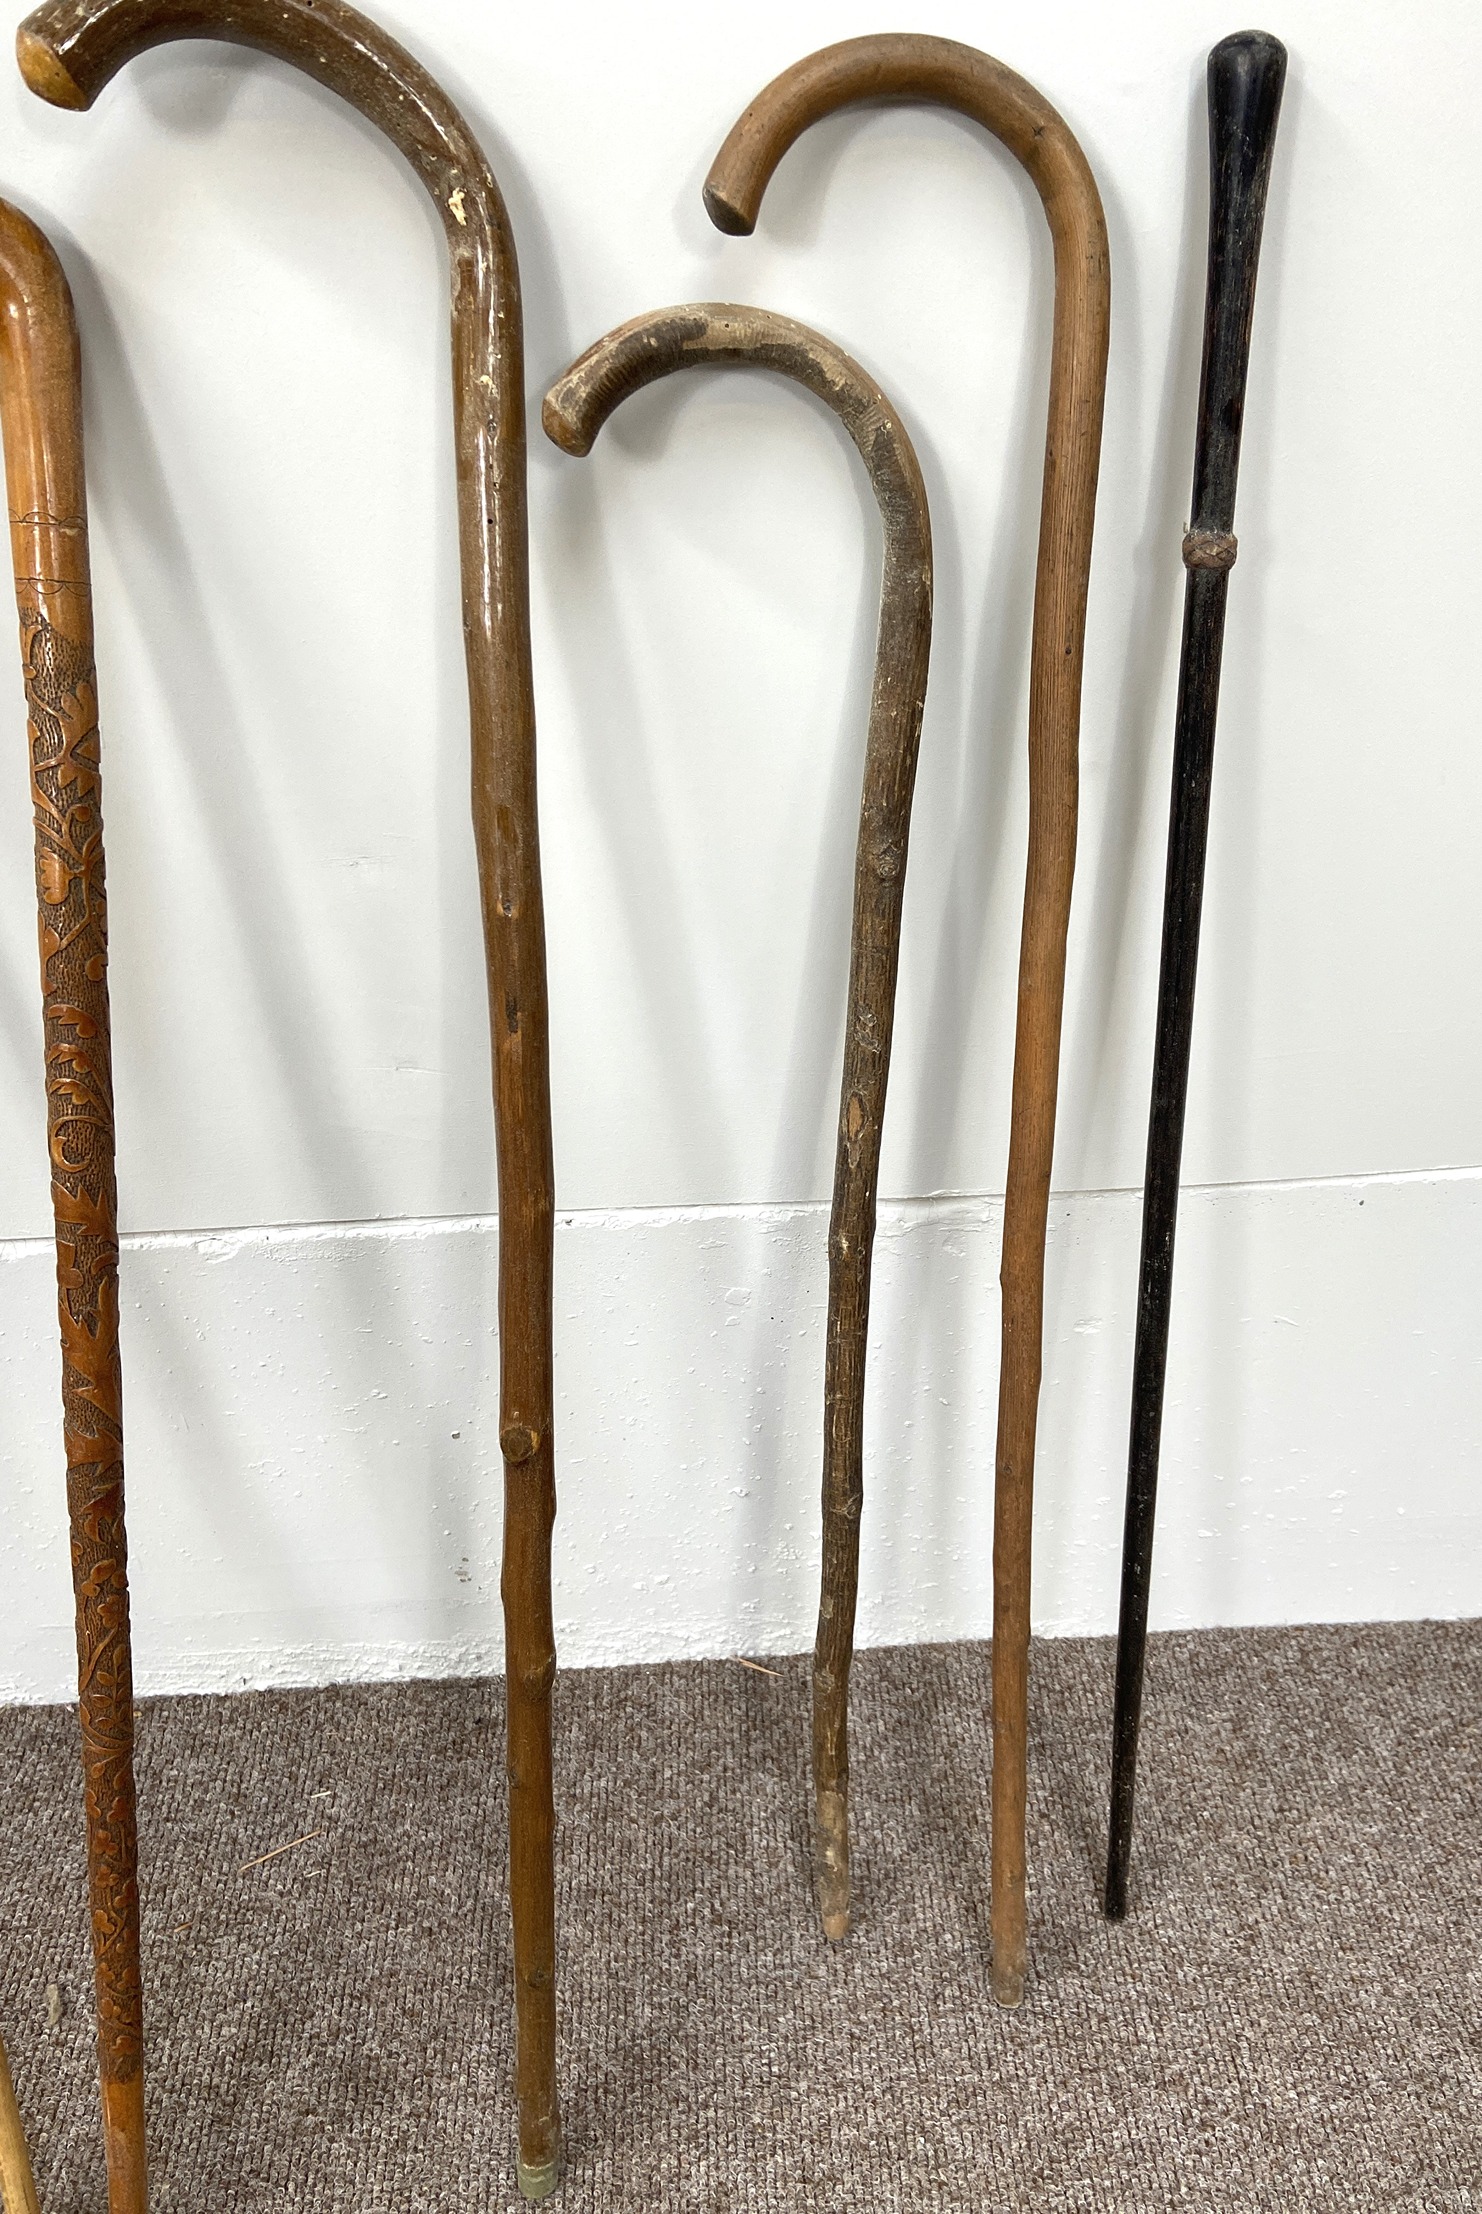 Six assorted walking sticks and canes, including an example with finely carved cane and hooked - Image 6 of 6